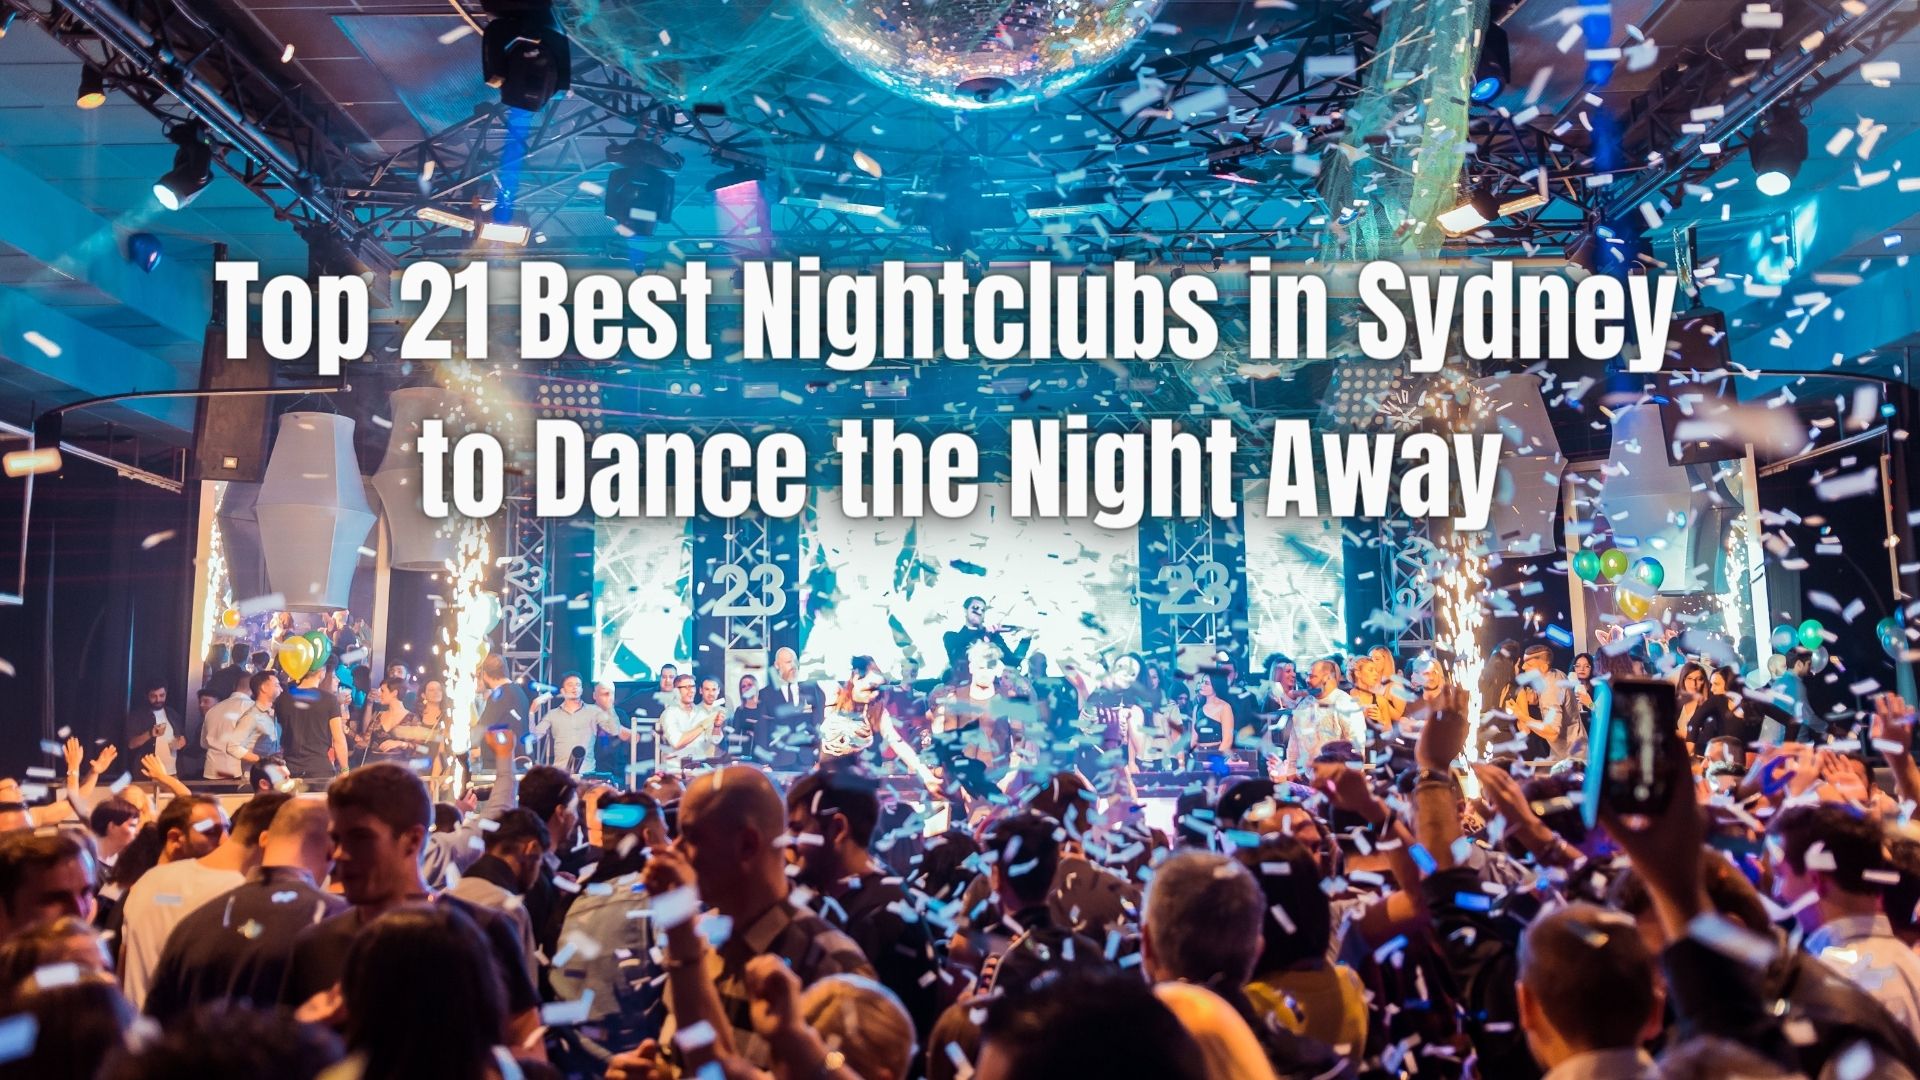 Hit the Sydney Club Scene! Our guide unlocks the best nightclubs for dancing, drinks, & unforgettable memories. Find yours now!